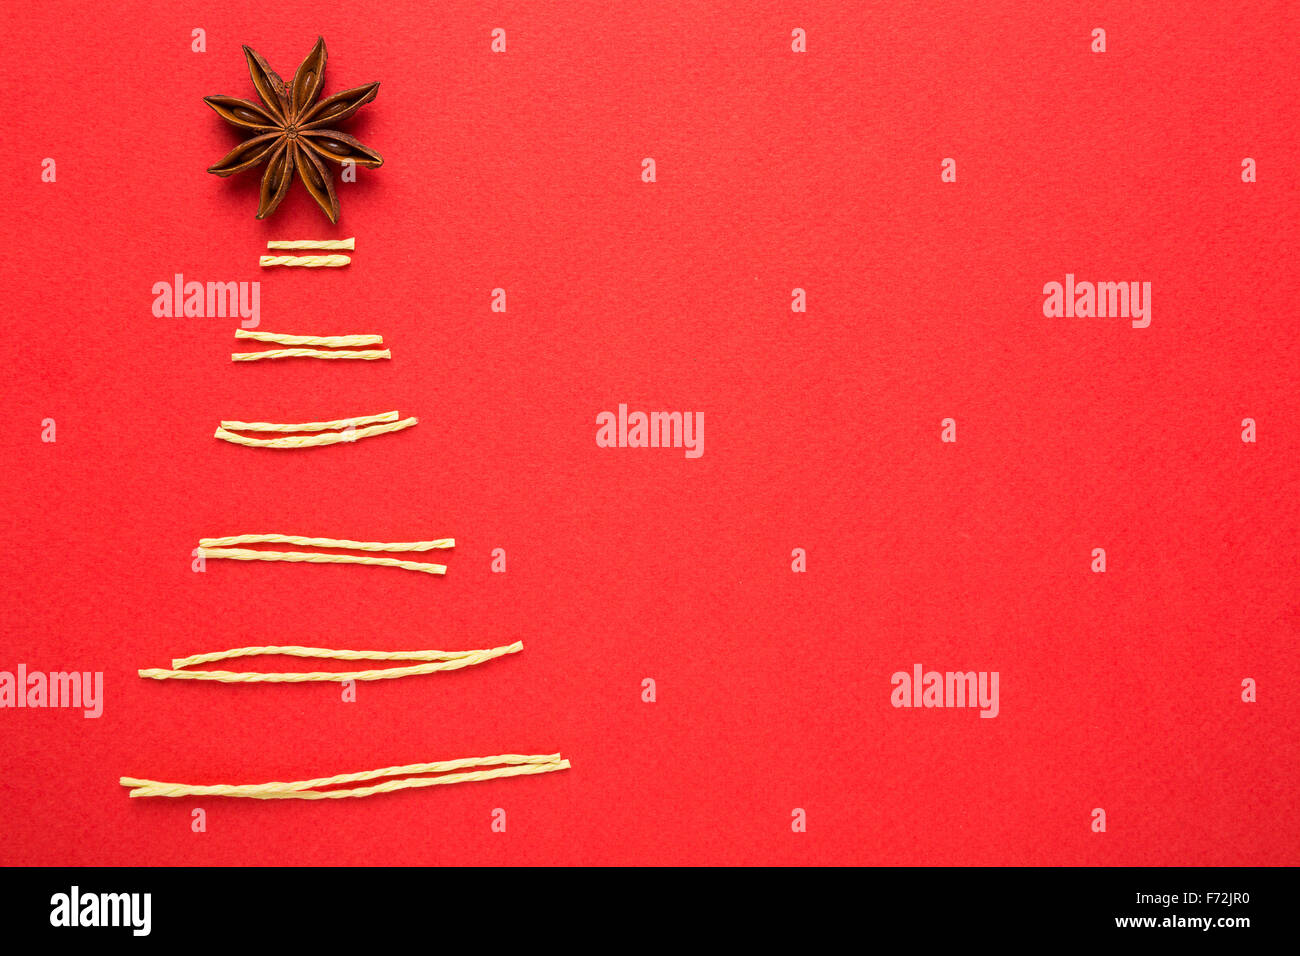 Christmas tree made from green wire on red background Stock Photo